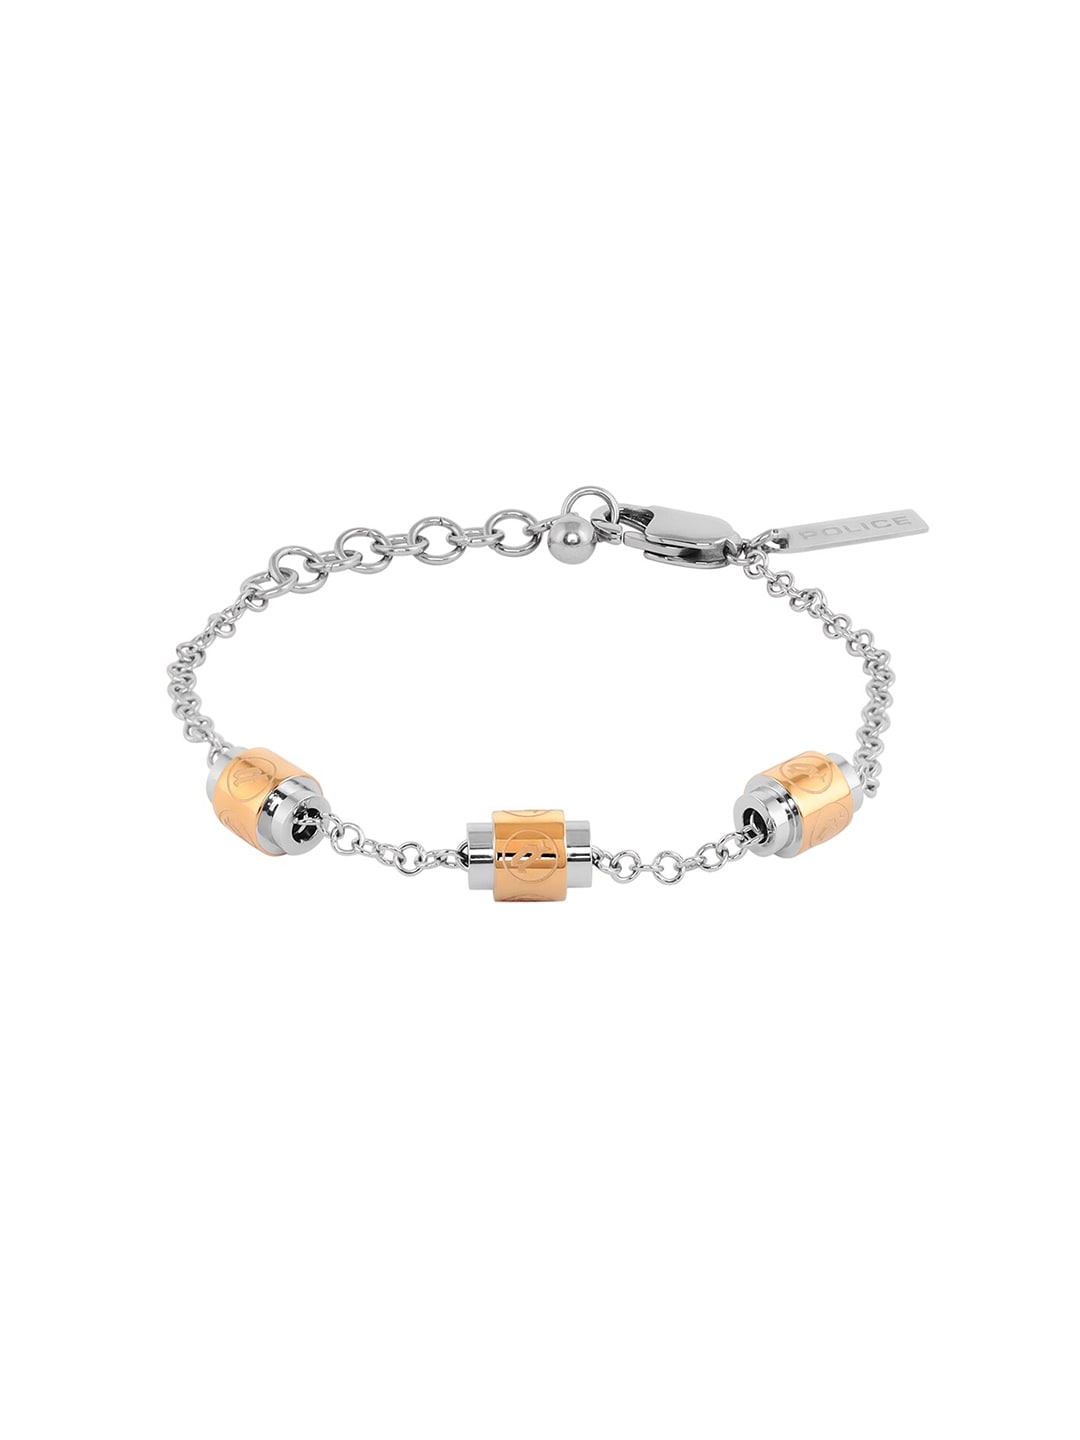 Police Women Gold-Toned & Silver-Toned Link Bracelet Price in India